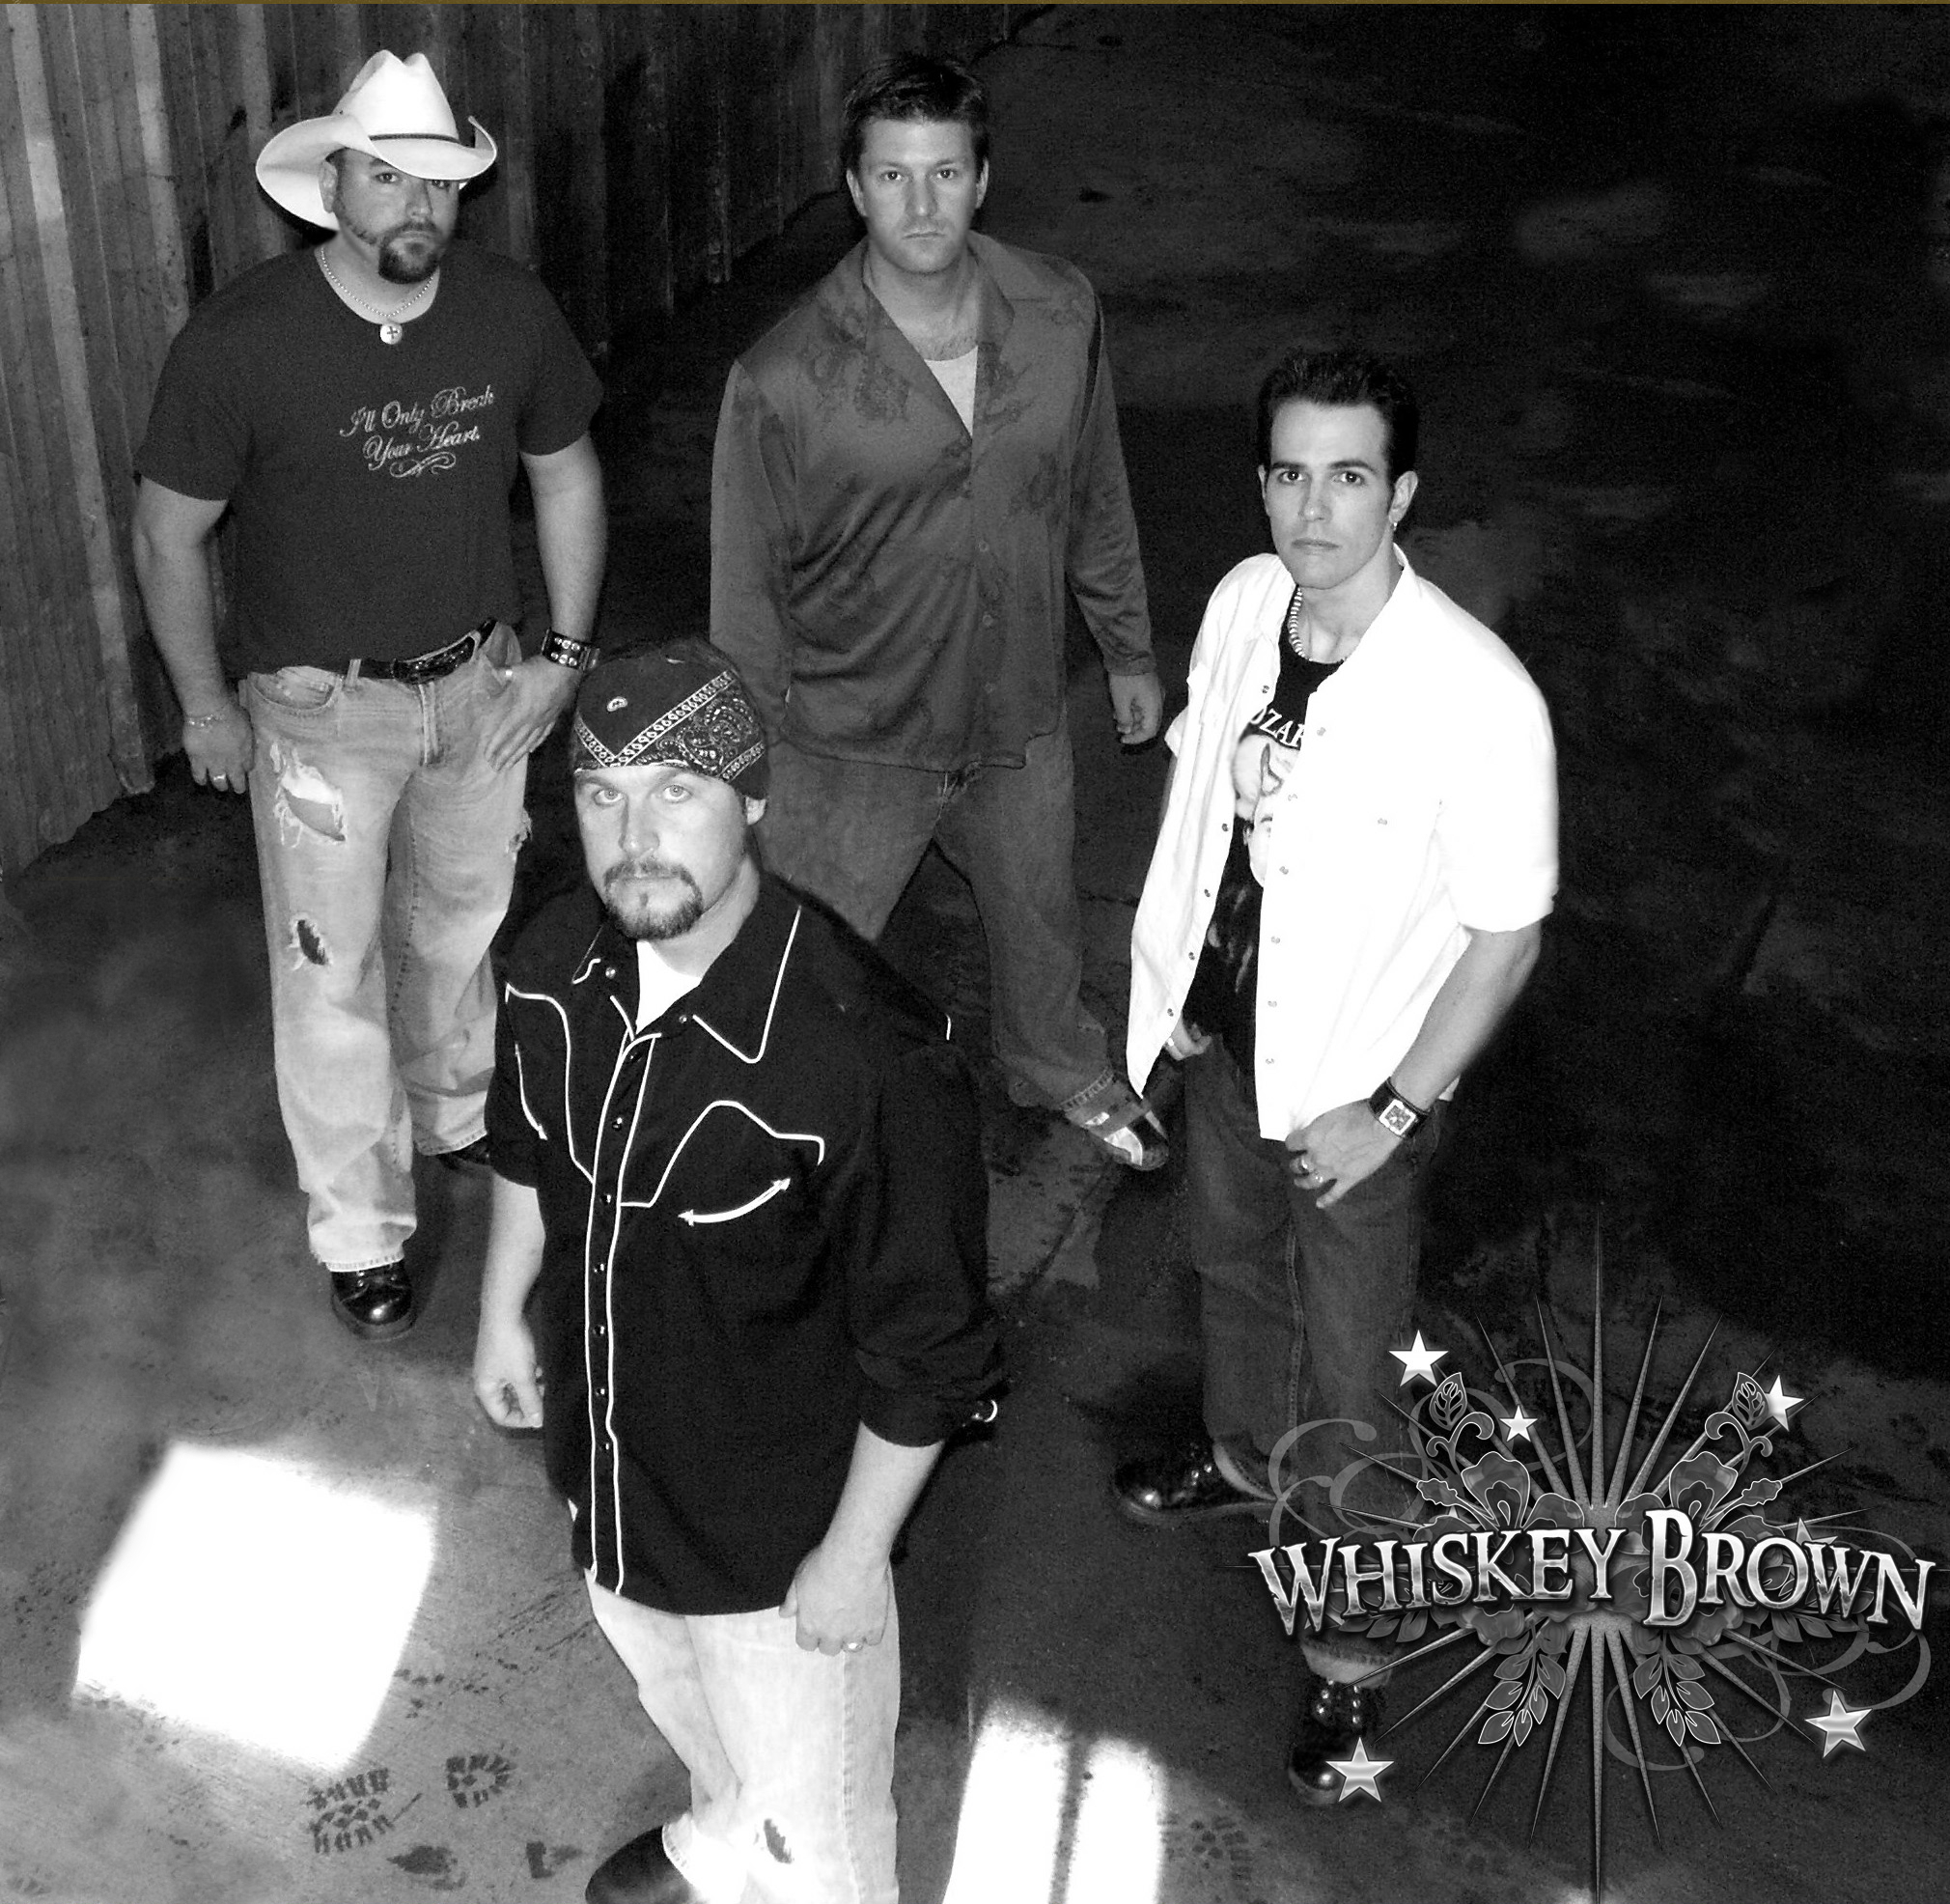 Whiskey Brown band members and the band's logo